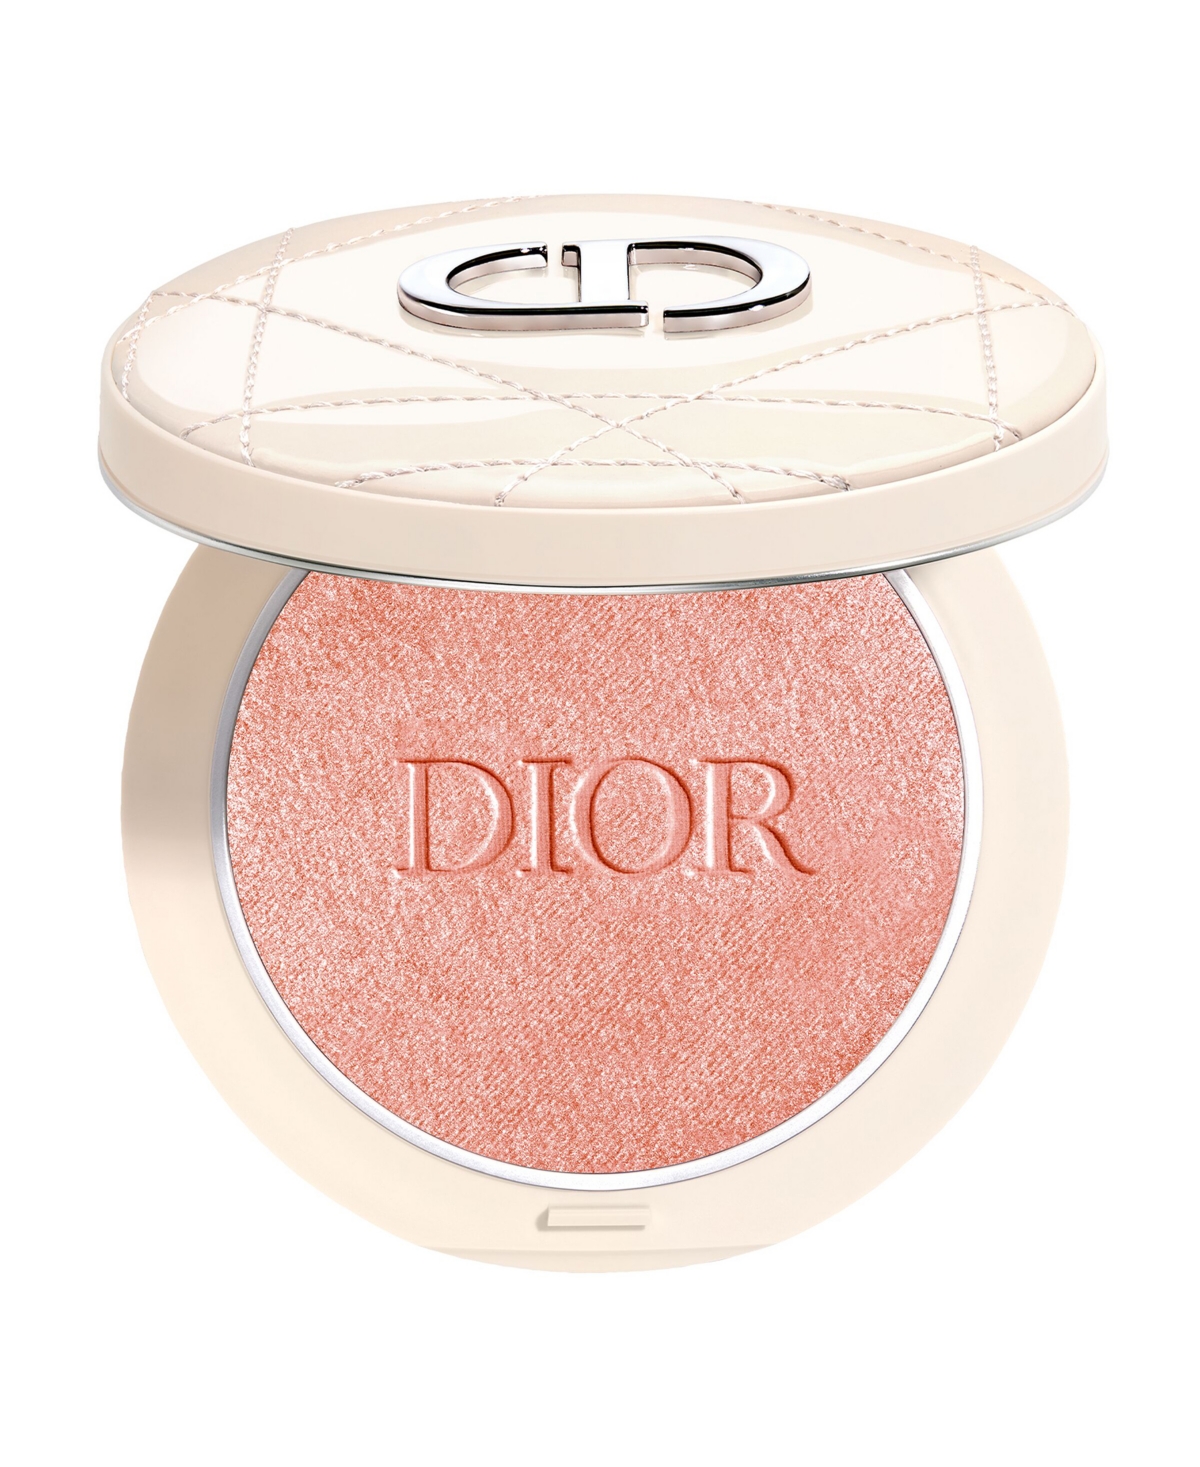 Dior Forever Couture Luminizer Highlighter Powder In Coral Glow